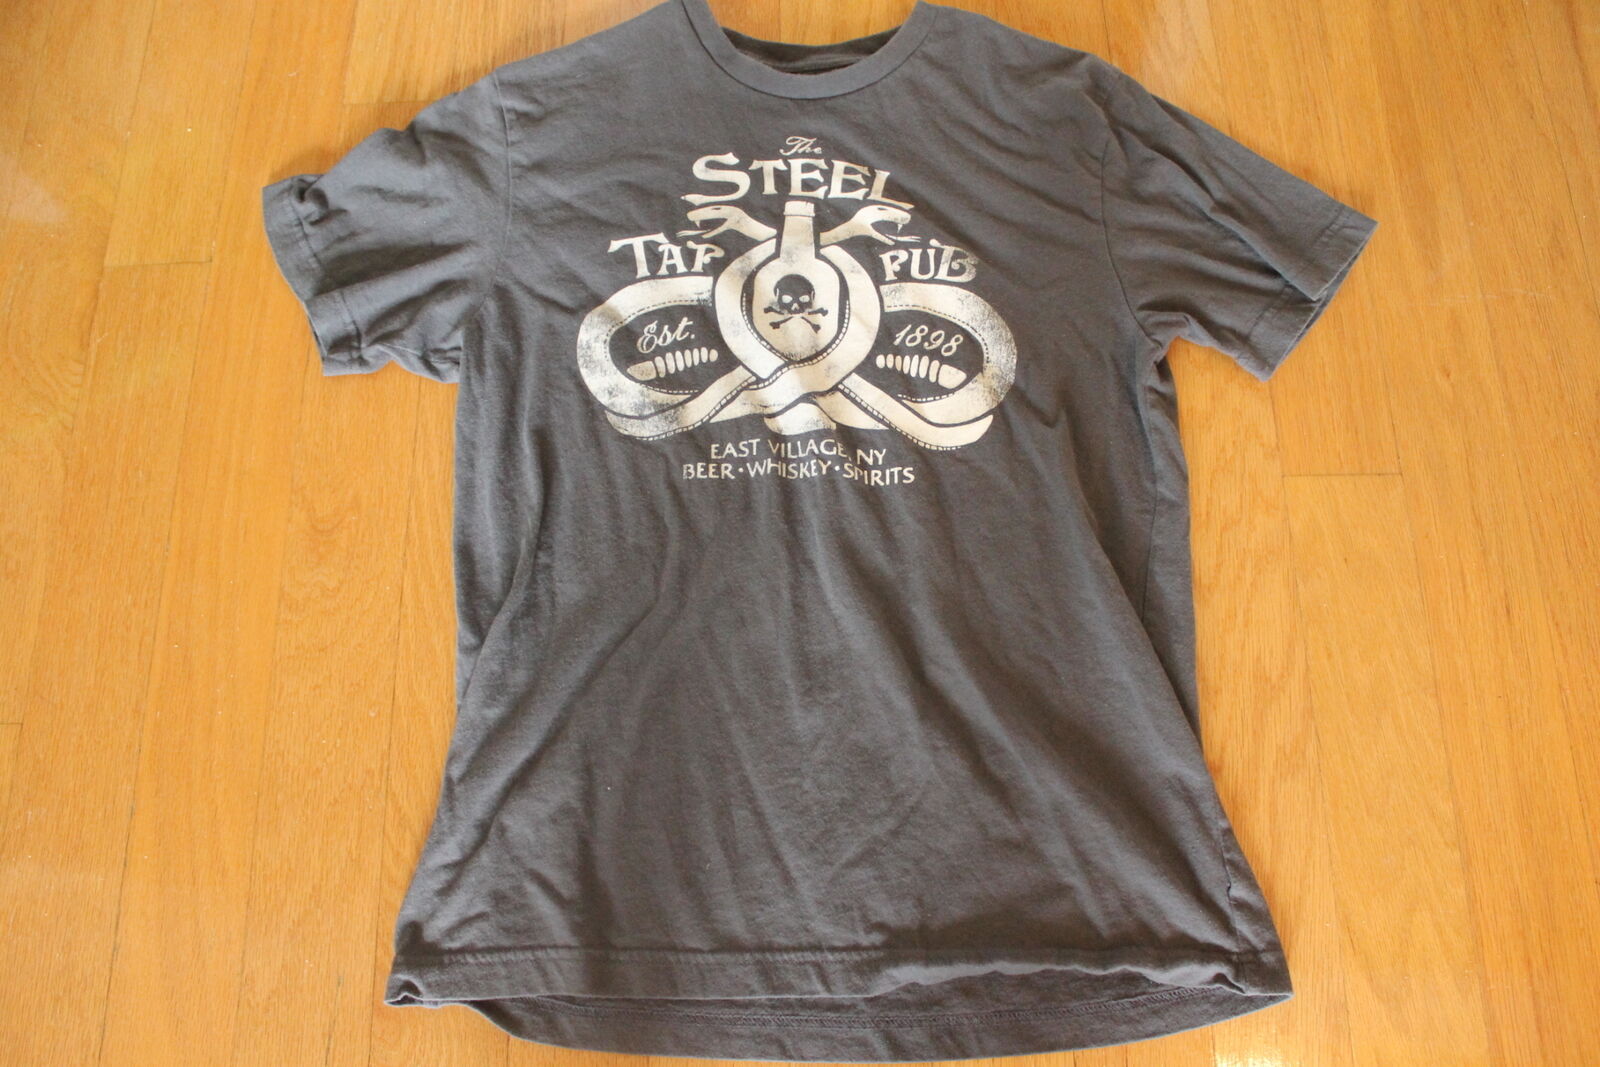 Used Old Navy Men\'s Gray Steel Tap Pub Cotton T-Shirt Training Shirt size M